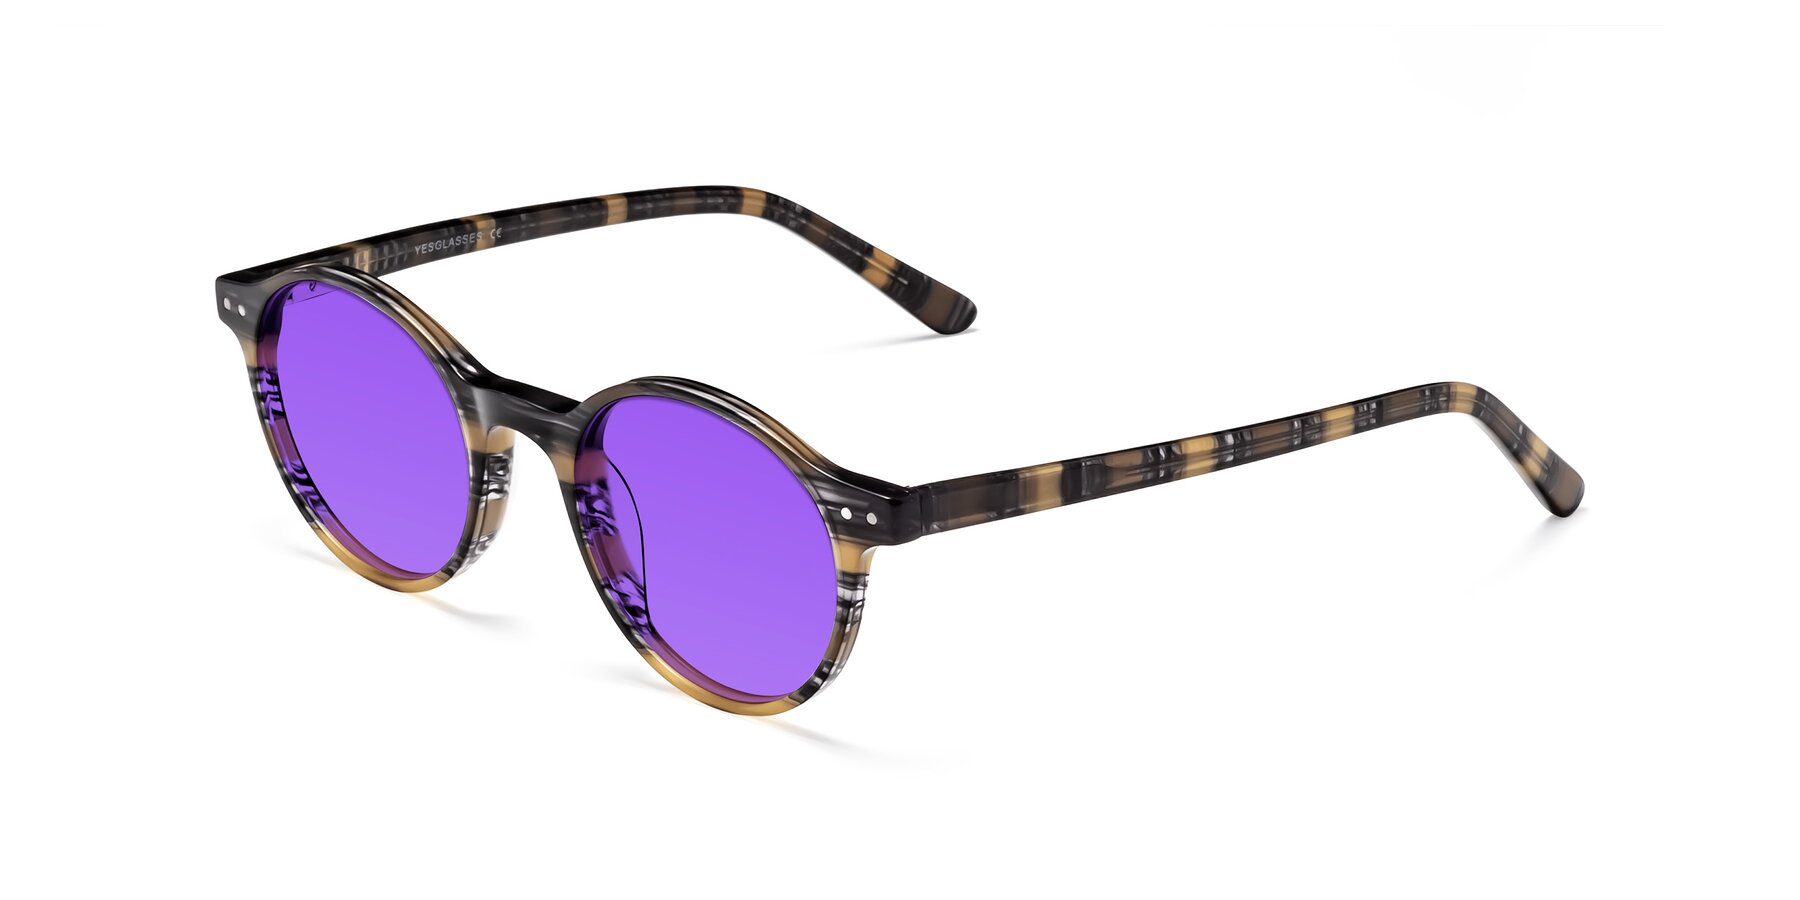 Angle of Jardi in Stripe Yellow Grey with Purple Tinted Lenses